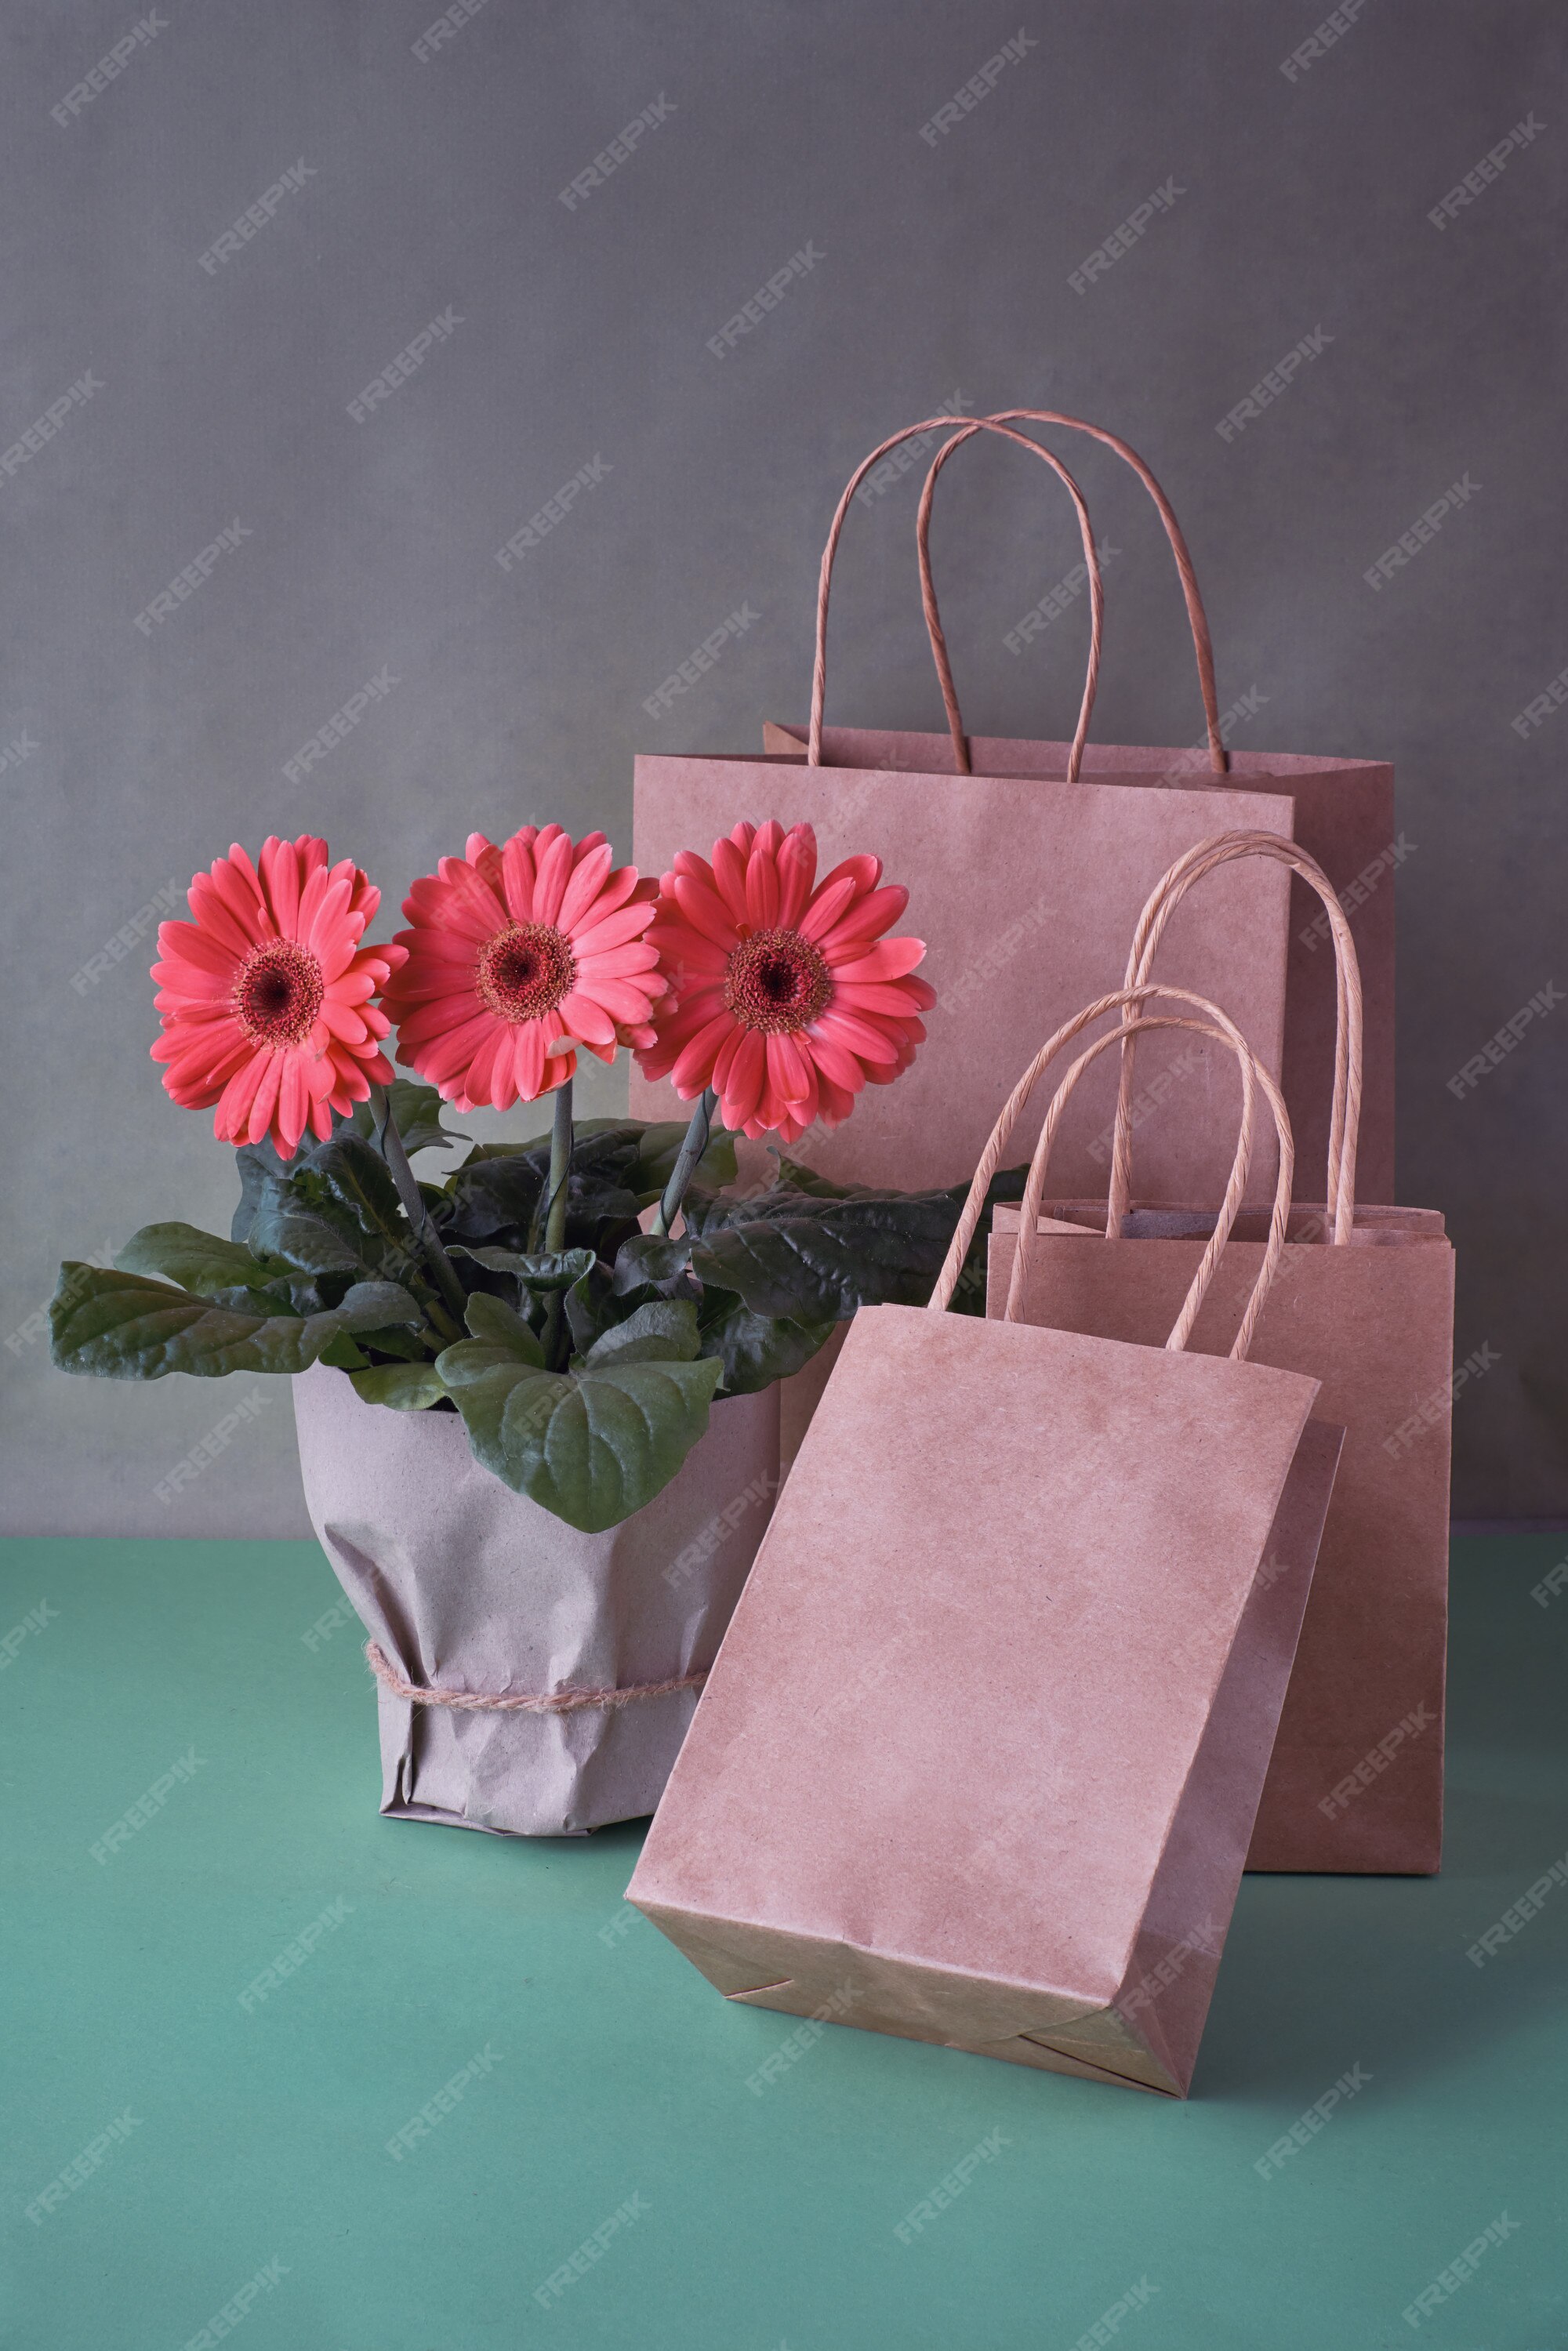 A Beautiful Flowers on a Chanel Paper Bag · Free Stock Photo